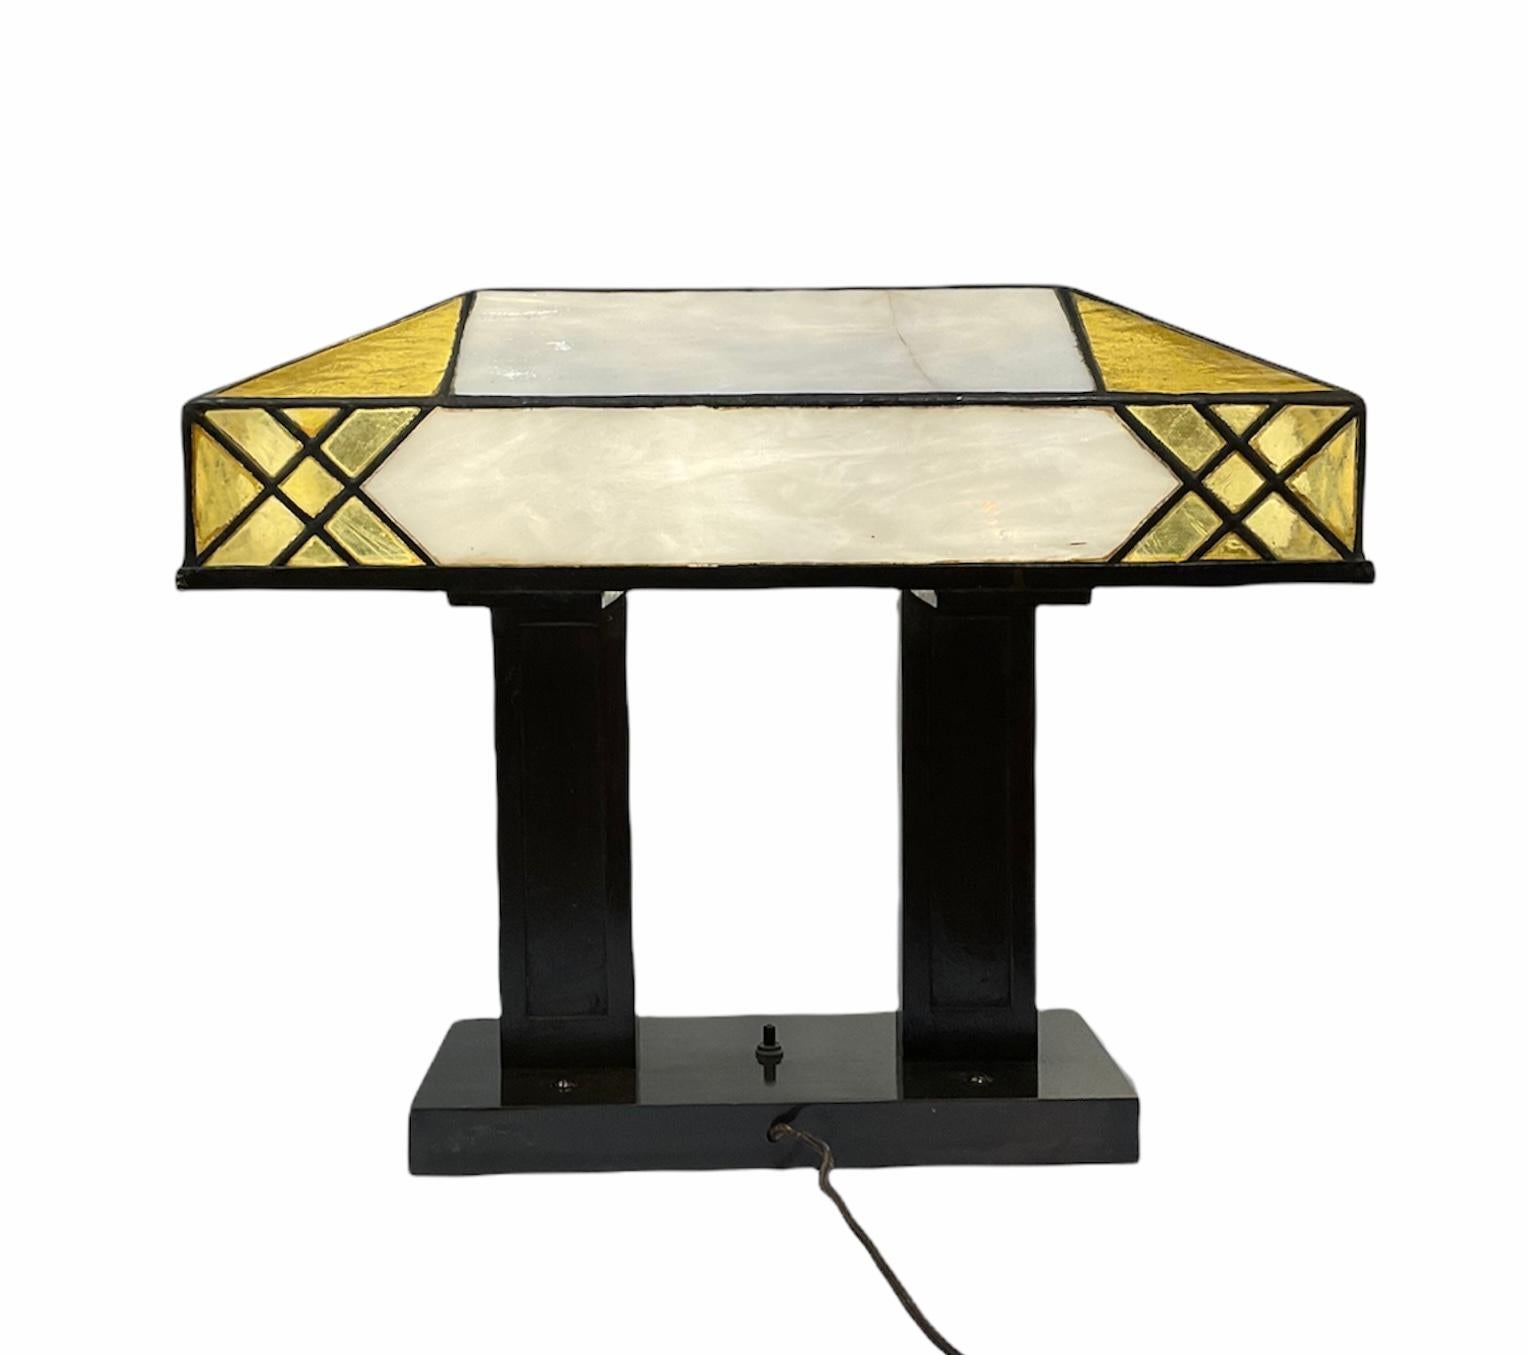 This is a Tiffany style Art Deco stained glass rectangular desk/table lamp. It features a shade made of a mosaic of topaz yellow and white color geometric pieces of stained glass mounted in wrought iron. It is supported by two standing wide metal